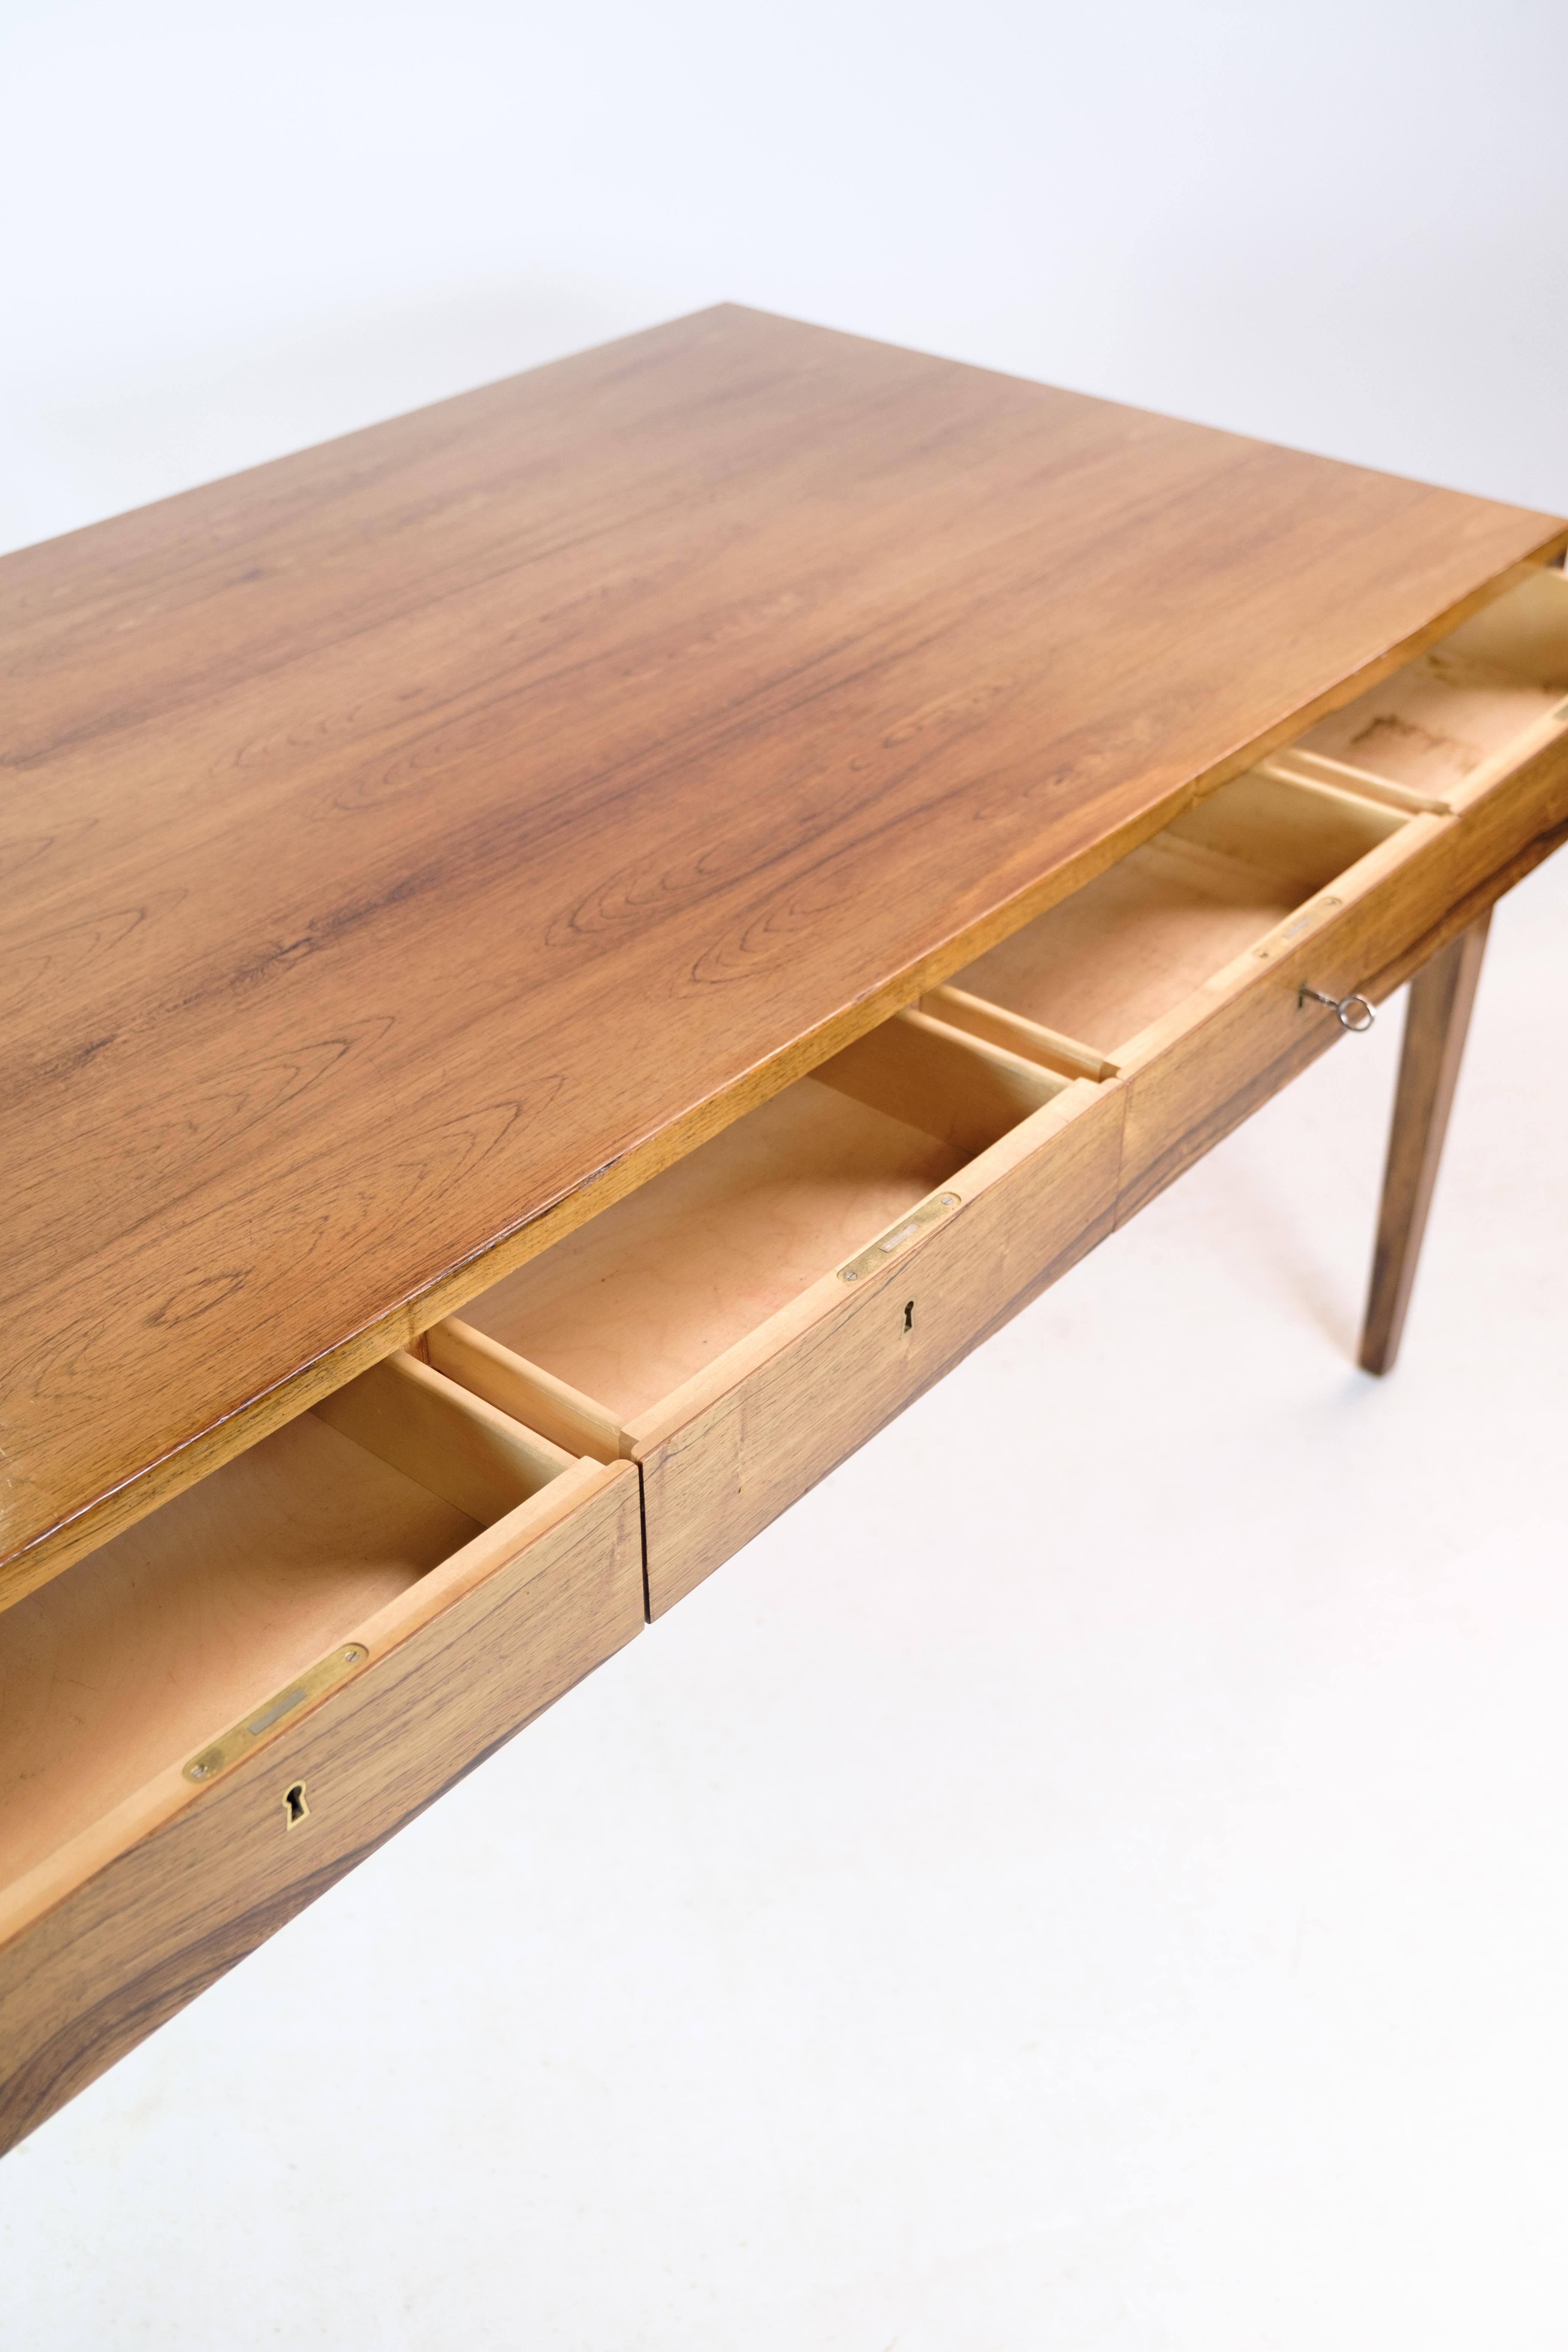 Freestanding desk, designed by Severin Hansen in rosewood manufactured at Haslev Møbelfabrik from around the 1960s. Keys included. The desk has 4 drawers and brass keyholes.

This product will be inspected thoroughly at our professional workshop